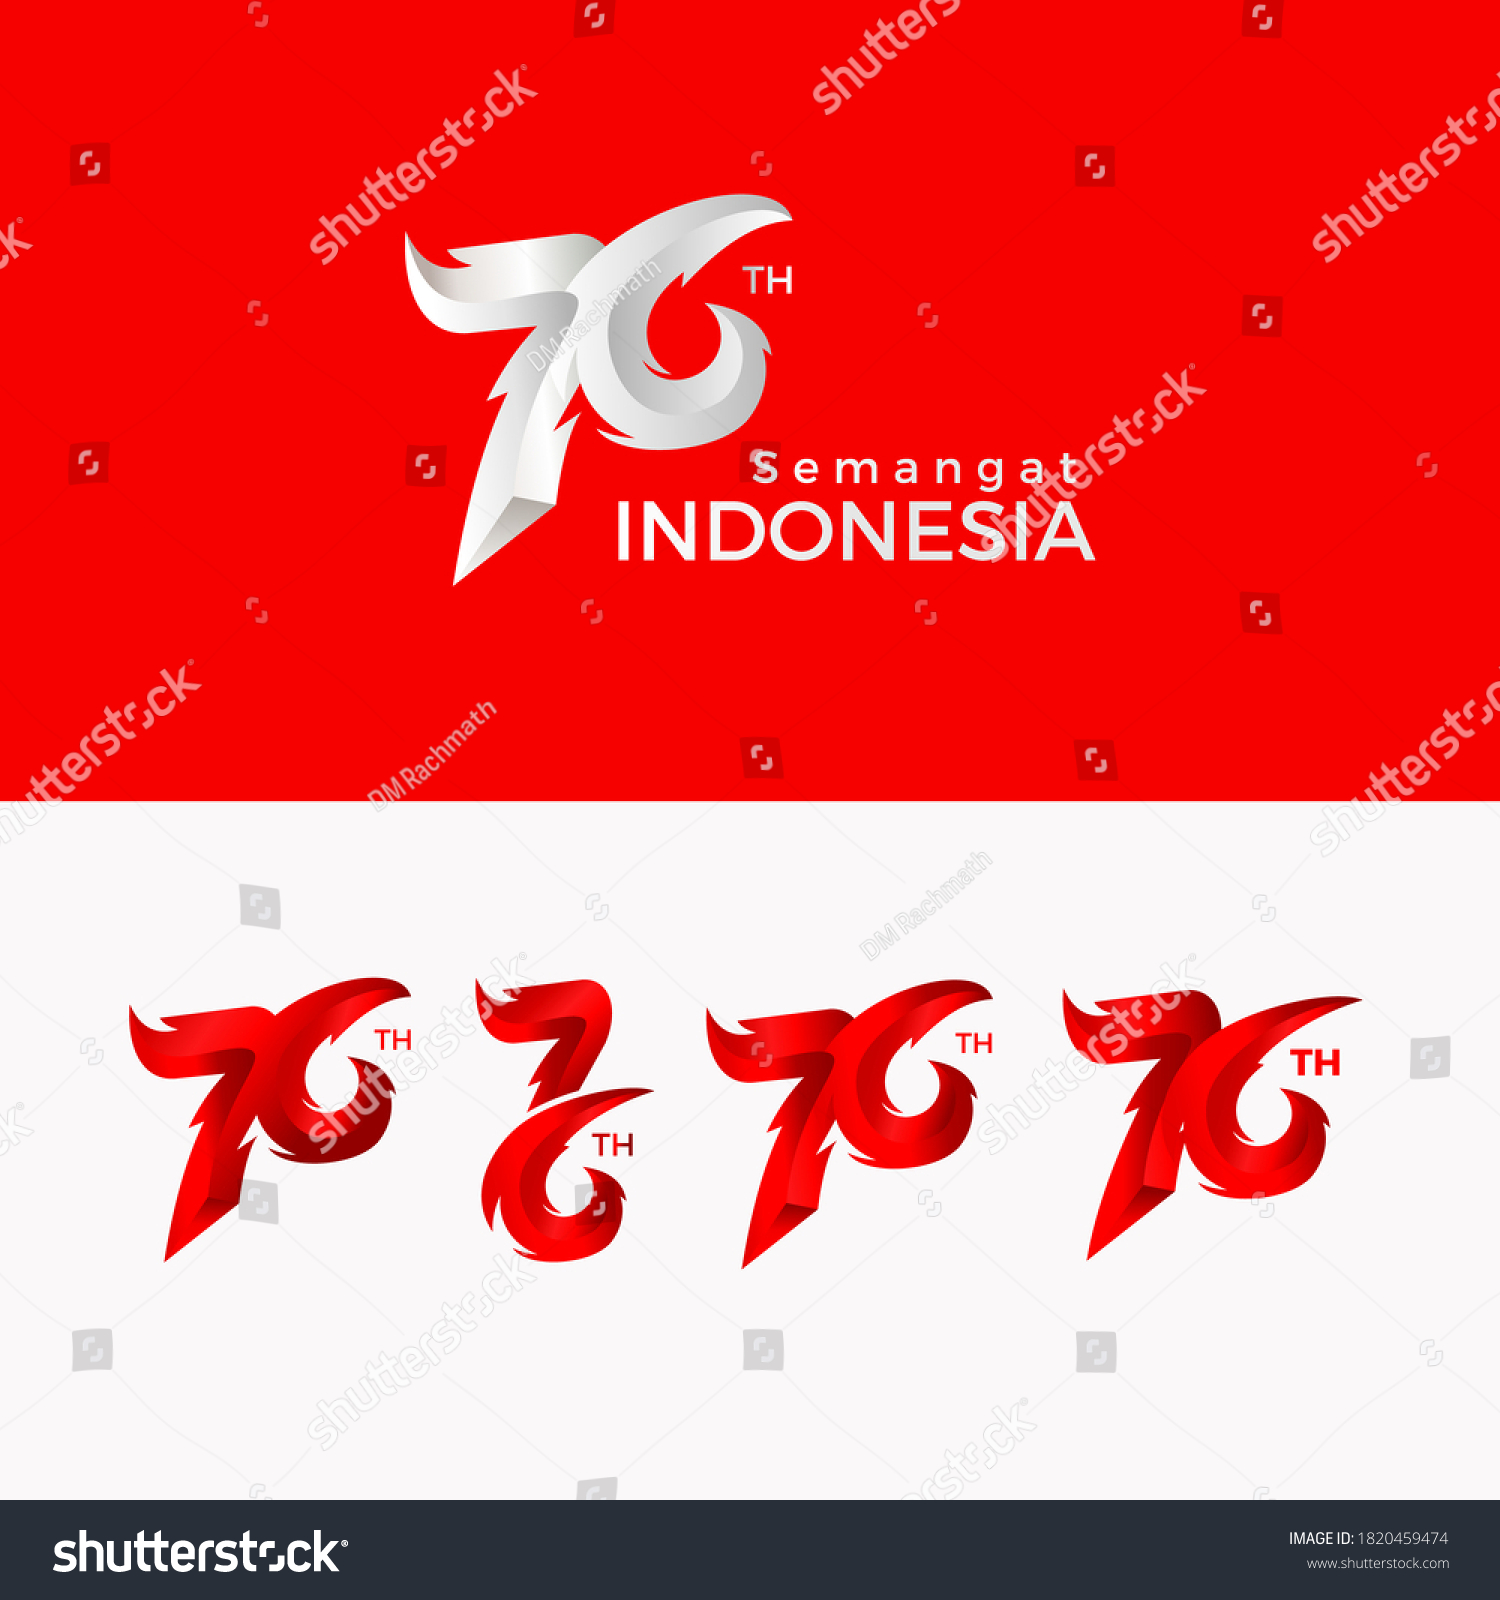 76th Indonesian Independence Day Logo Concept Royalty Free Stock Vector 1820459474 6998